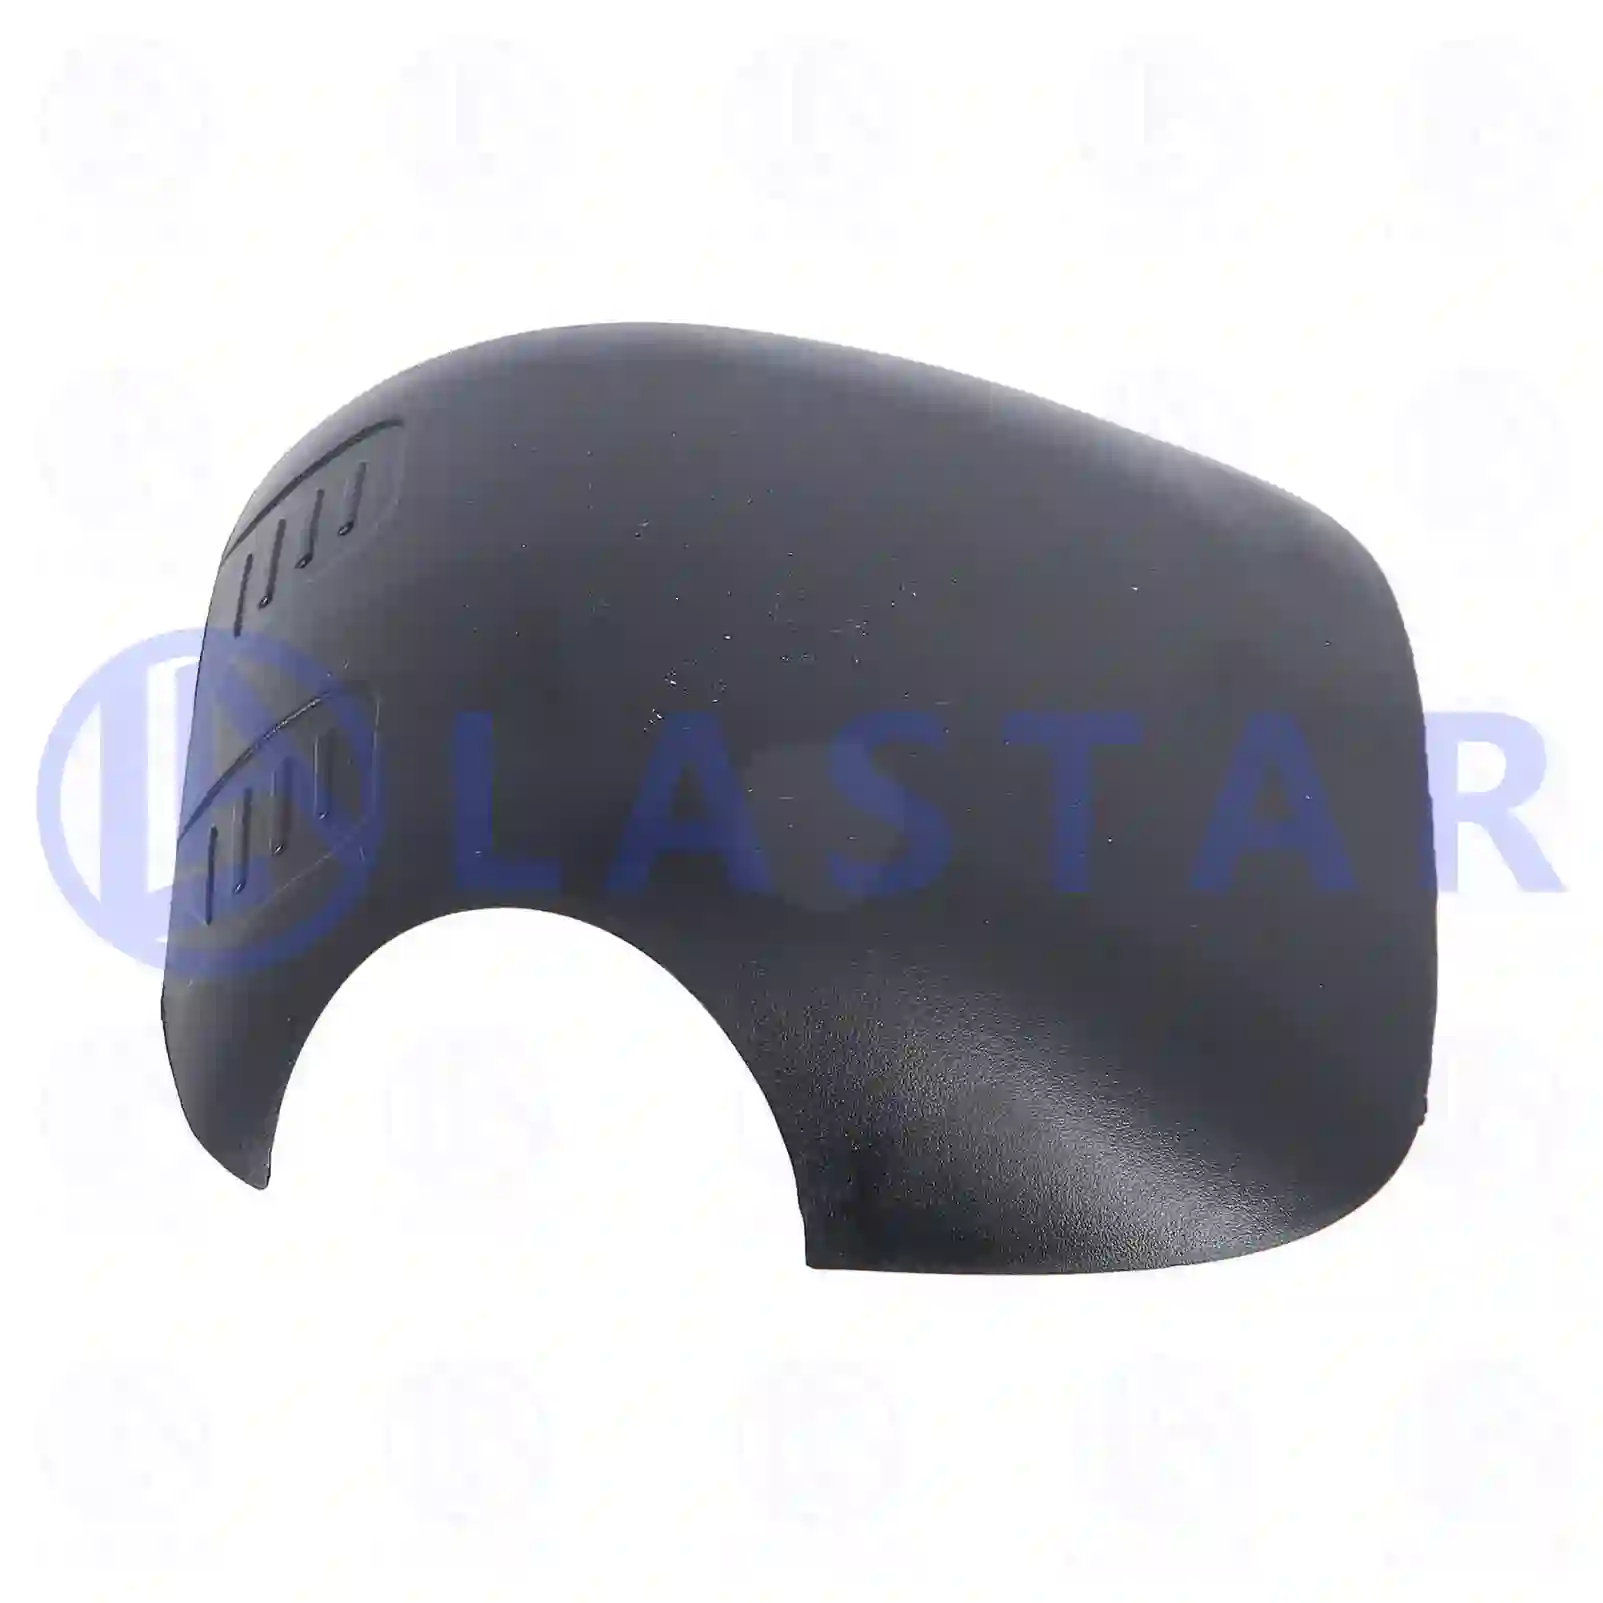 Cover, wide view mirror, 77720810, 93193203 ||  77720810 Lastar Spare Part | Truck Spare Parts, Auotomotive Spare Parts Cover, wide view mirror, 77720810, 93193203 ||  77720810 Lastar Spare Part | Truck Spare Parts, Auotomotive Spare Parts